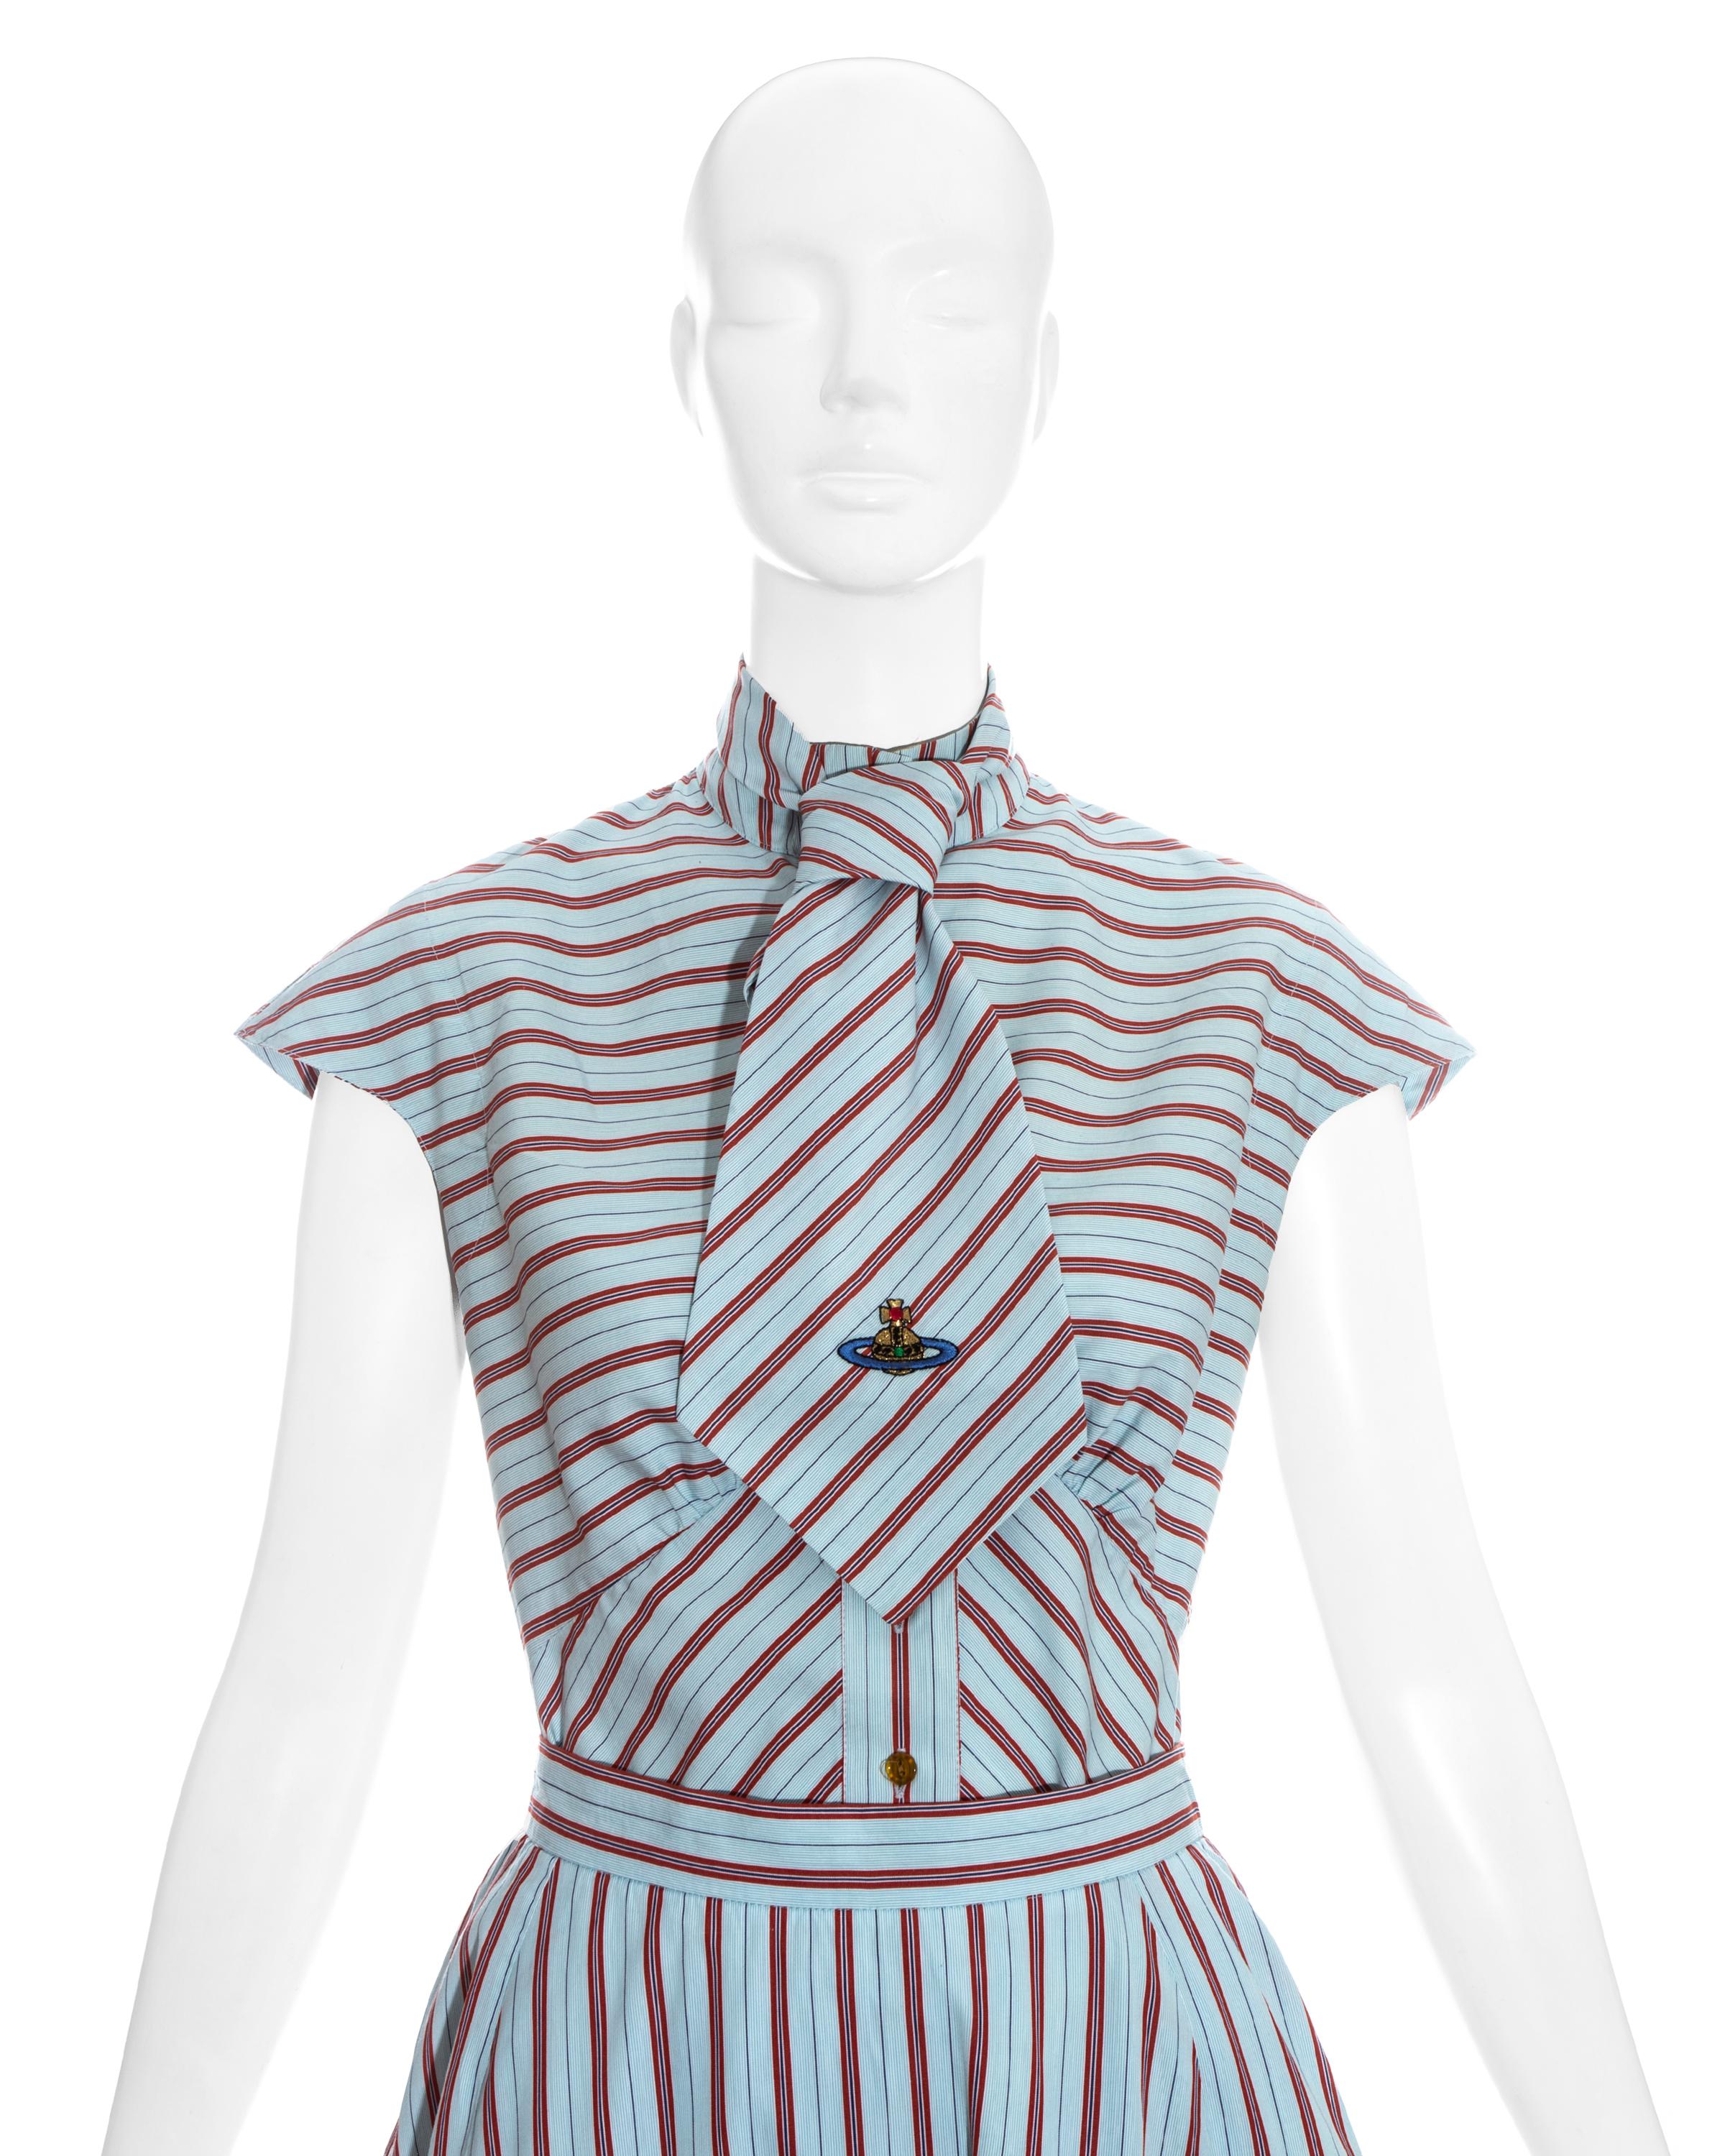 Original Vivienne Westwood Gold Label ensemble featuring a blue an d red striped skirt, blouse, and very rare wide tie.

Spring-summer 1996

Measurements:

Shirt (UK 12)
Shoulder - 21in
Chest - 34.6in
Length - 22.8in

Skirt (UK 12)
Waist -